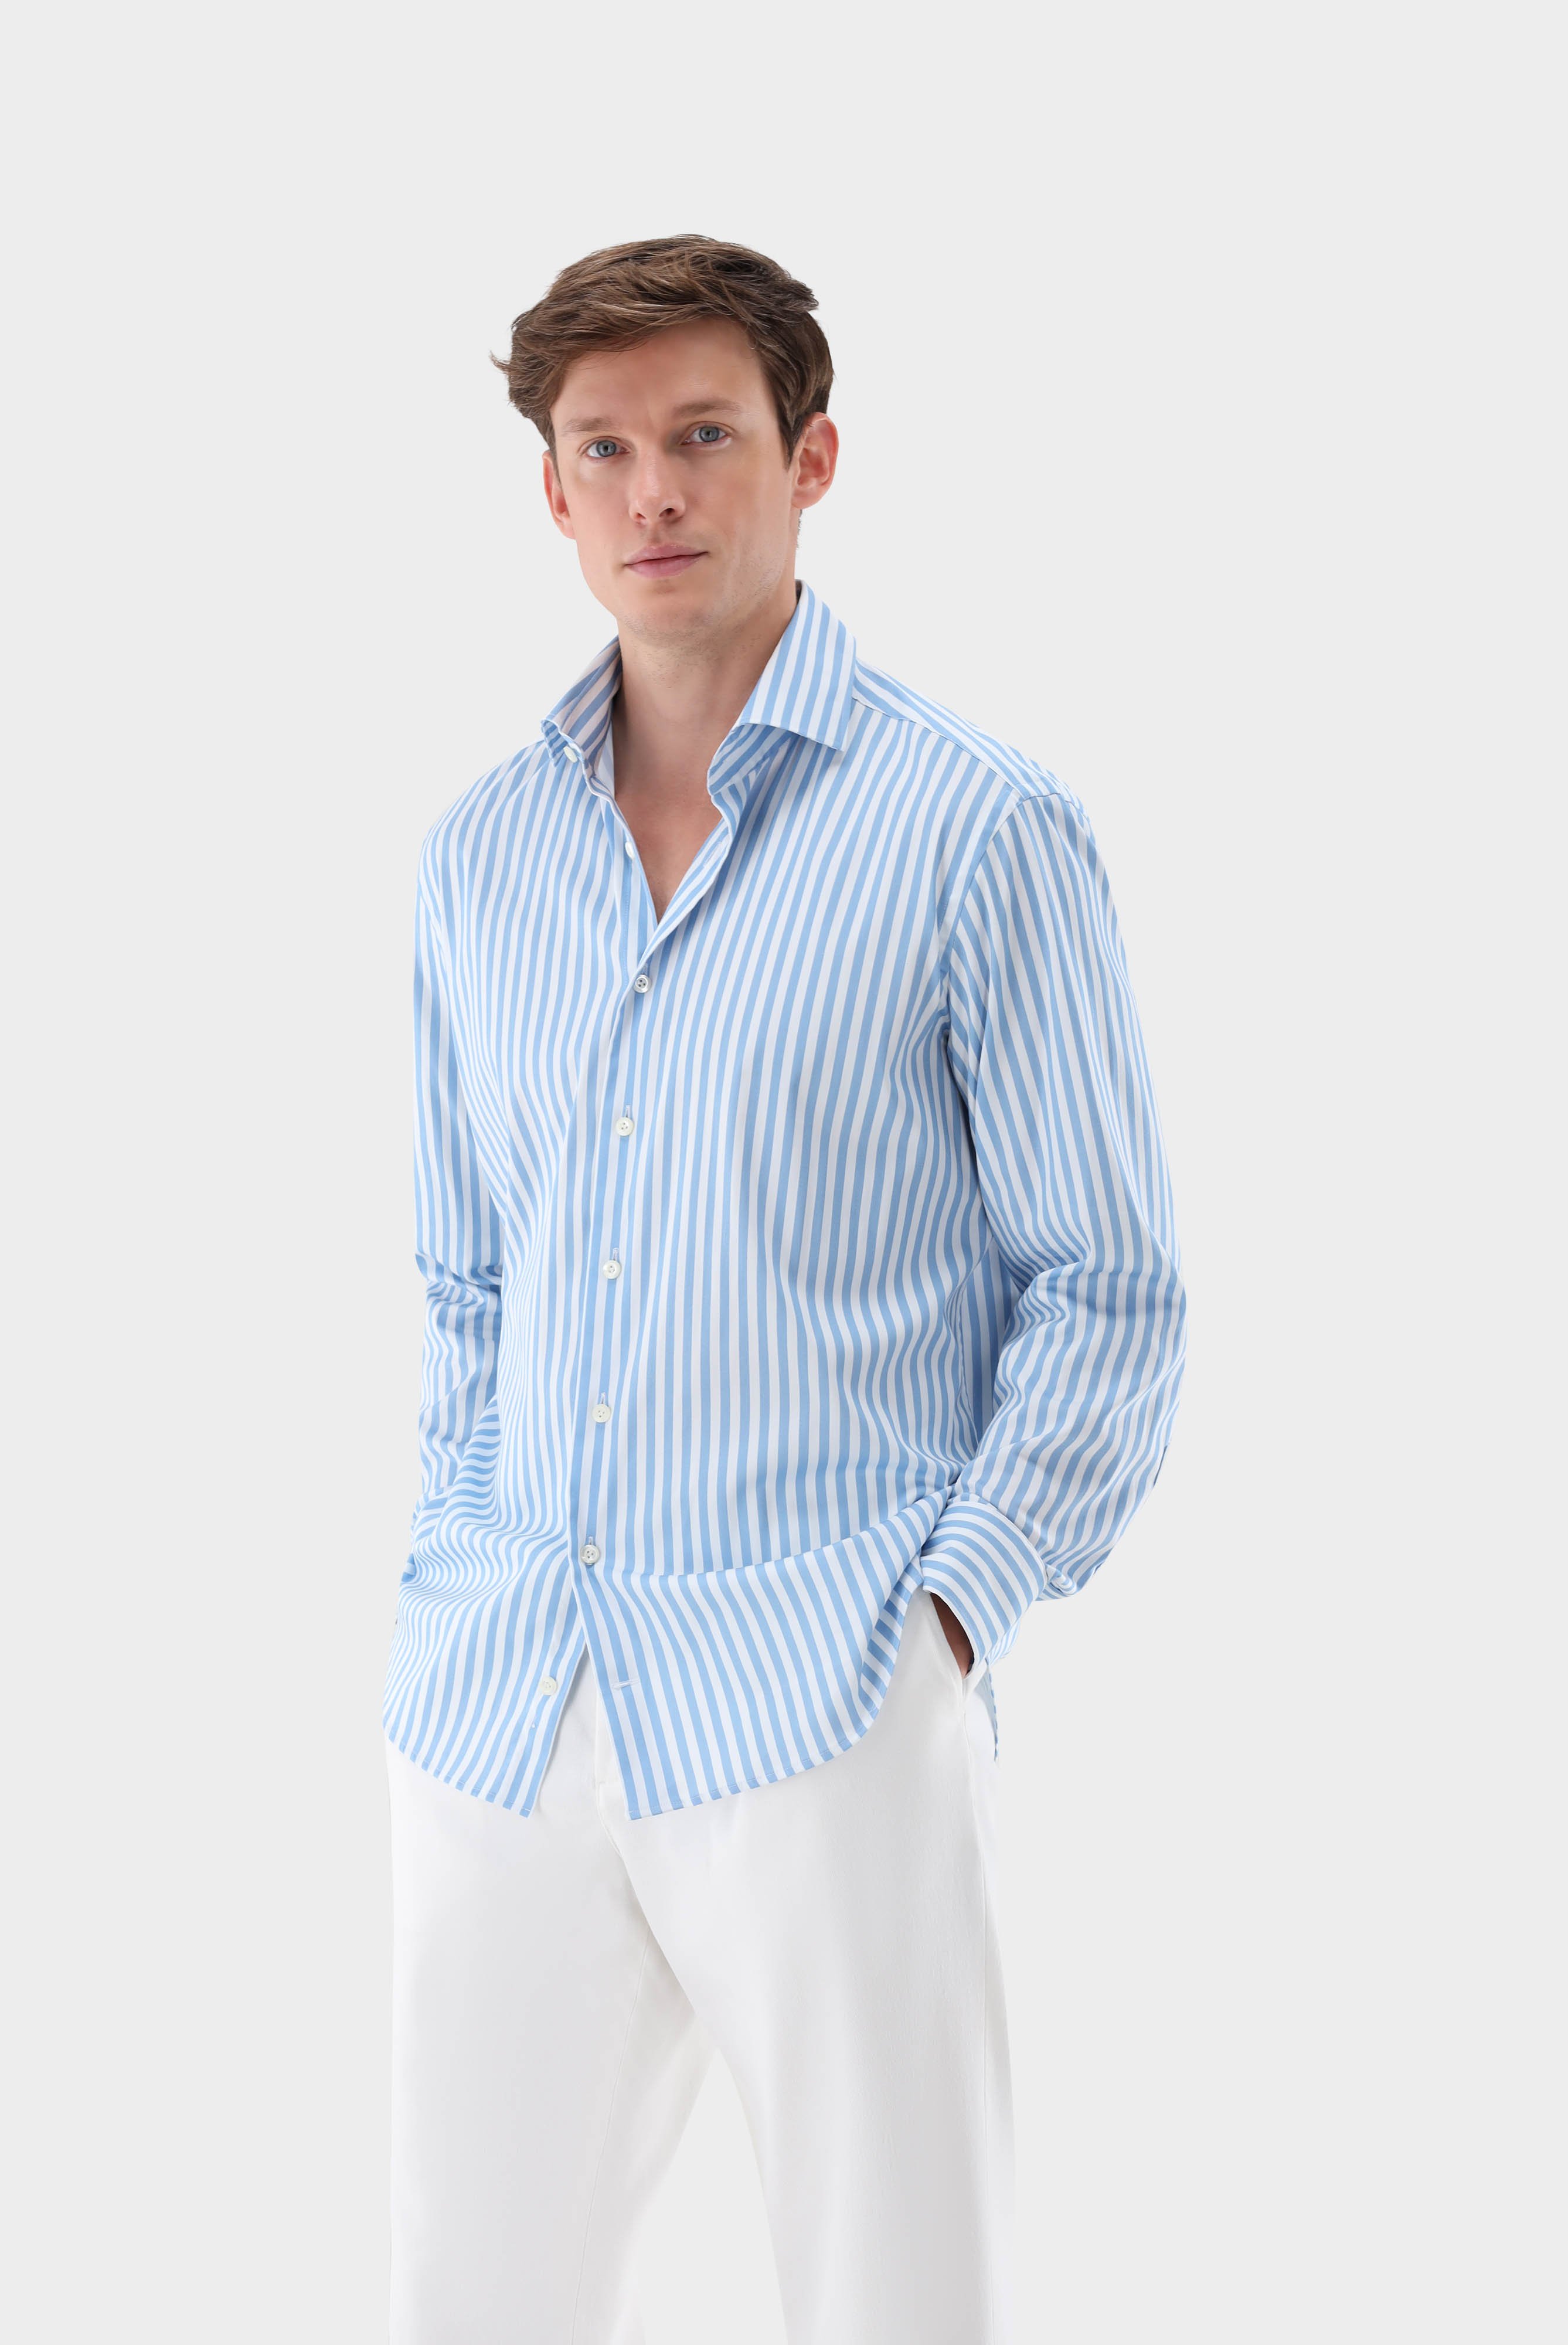 Casual Shirts+Striped Shirt in Cotton Stretch Tailor Fit+20.3283.NV.171959.720.38